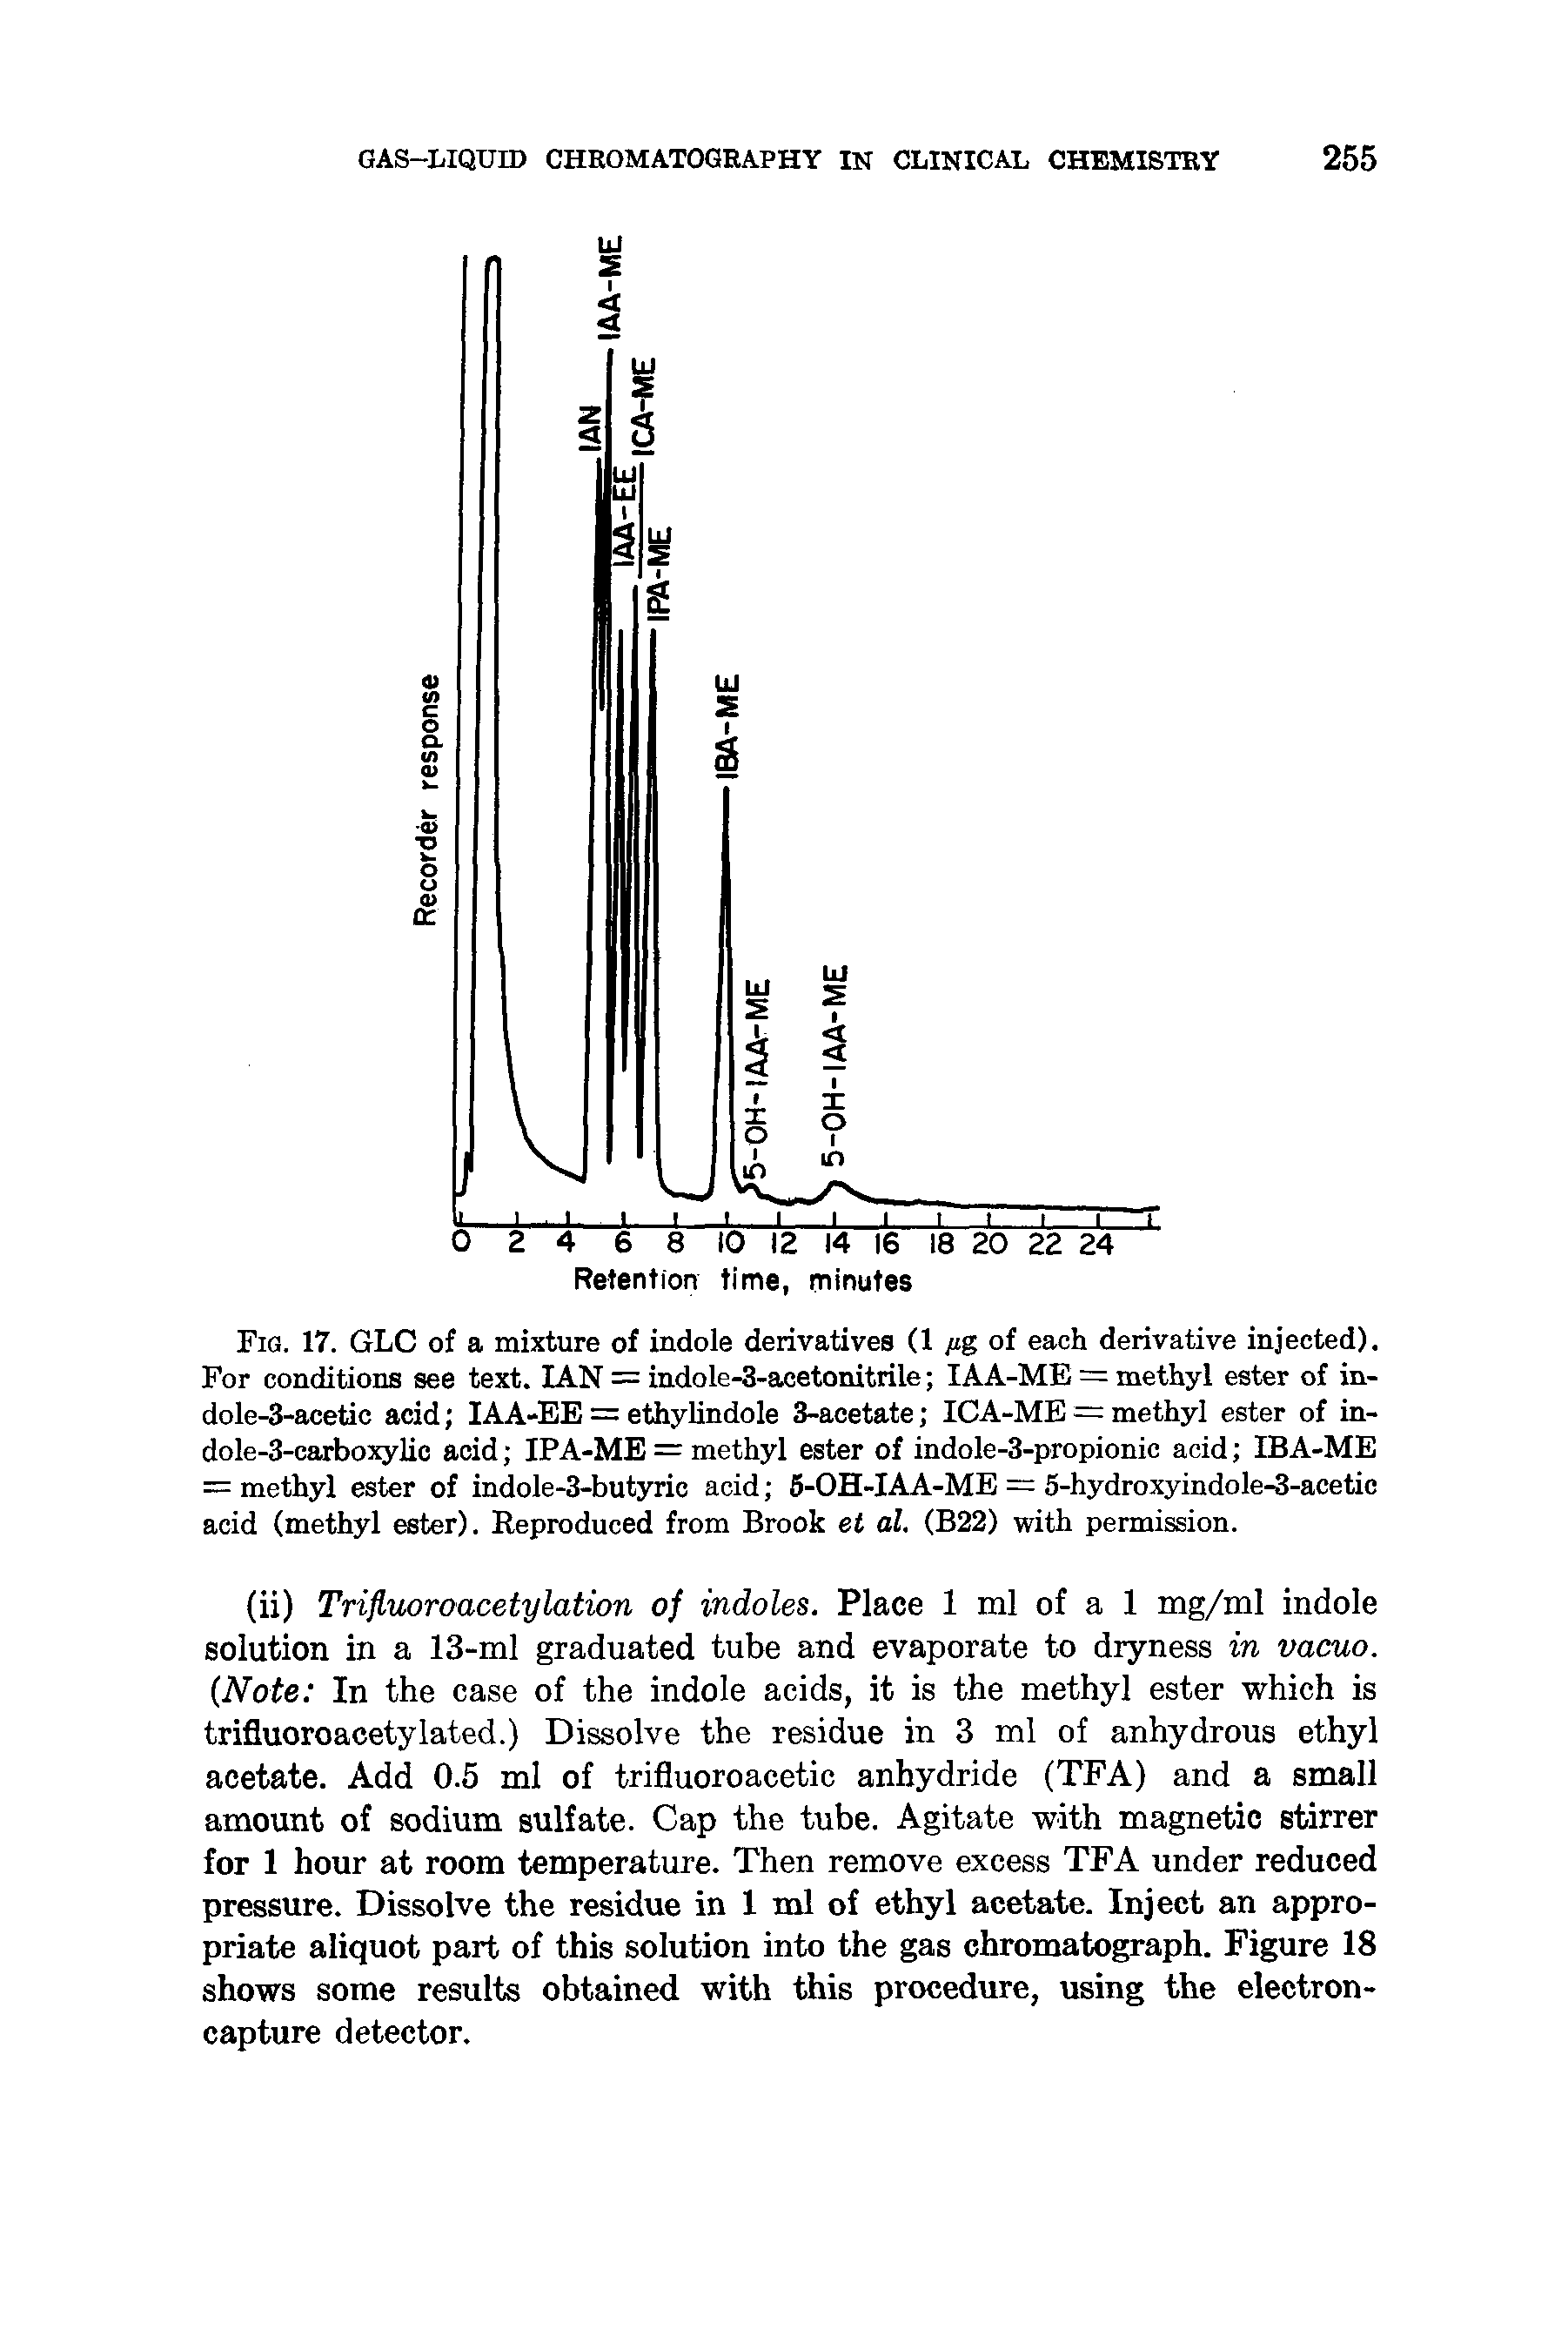 Fig. 17. GLC of a mixture of indole derivatives (1 /jg of each derivative injected). For conditions see text. IAN = indole-3-acetonitrile lAA-ME = methyl ester of in-dole-3-acetic acid lAA-EE = ethylindole 3-acetate ICA-ME = methyl ester of in-dole-3-carboxylio acid IPA-ME = methyl ester of indole-3-propionic acid IBA-ME = methyl ester of indole-3-butyrio acid 6-OH-IAA-ME = 5-hydroxyindole-3-acetic acid (methyl ester). Reproduced from Brook et al. (B22) with permission.